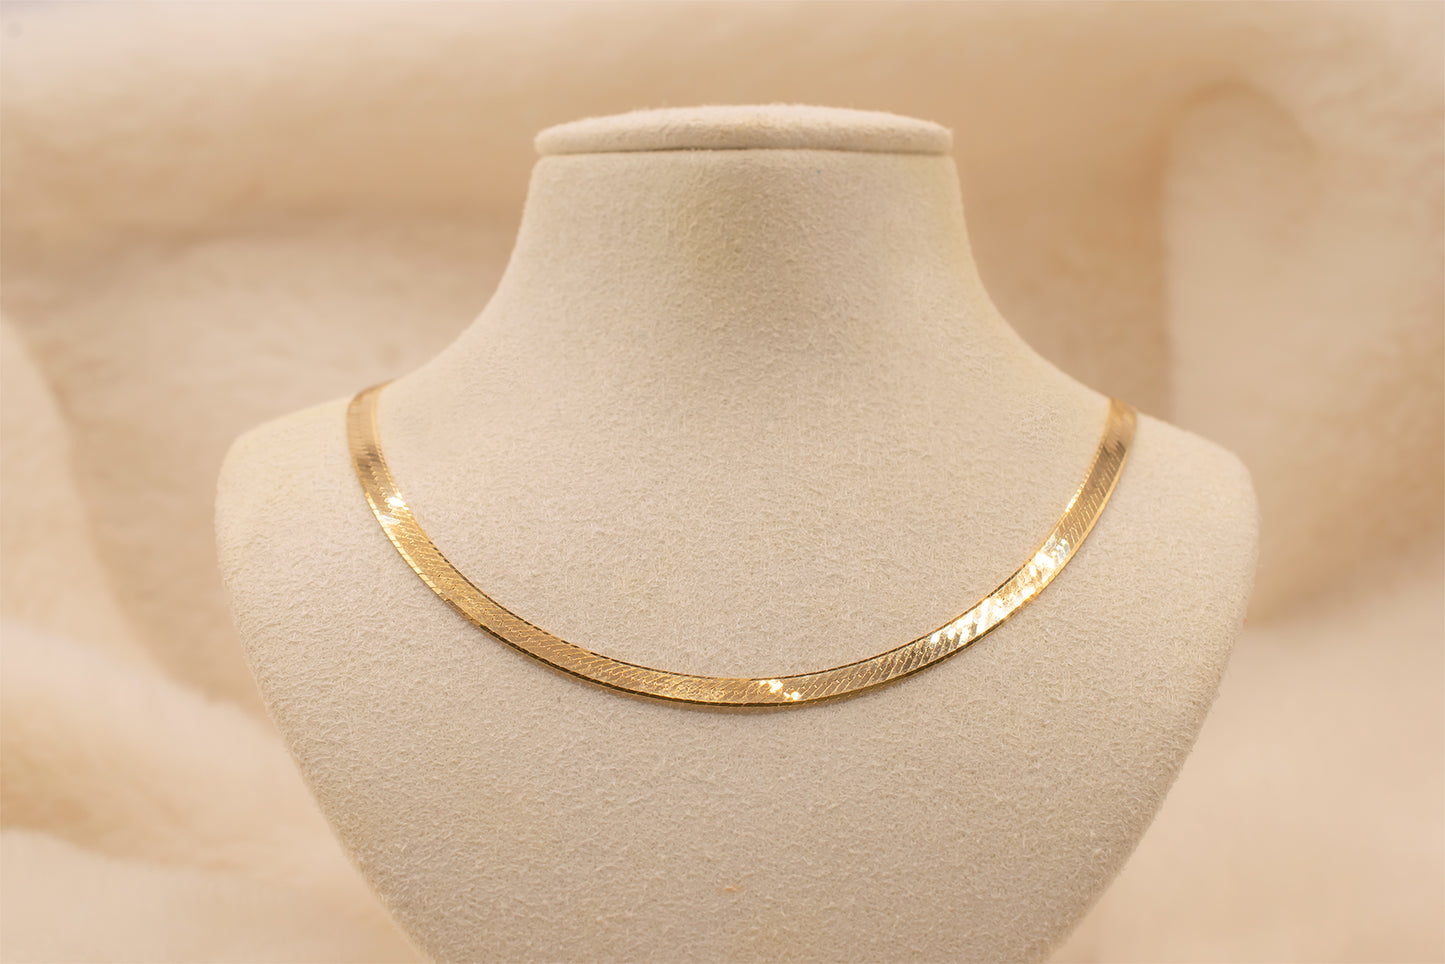 Vintage 14K Yellow Gold Italian 3mm Herringbone Chain Necklace 16 Inches